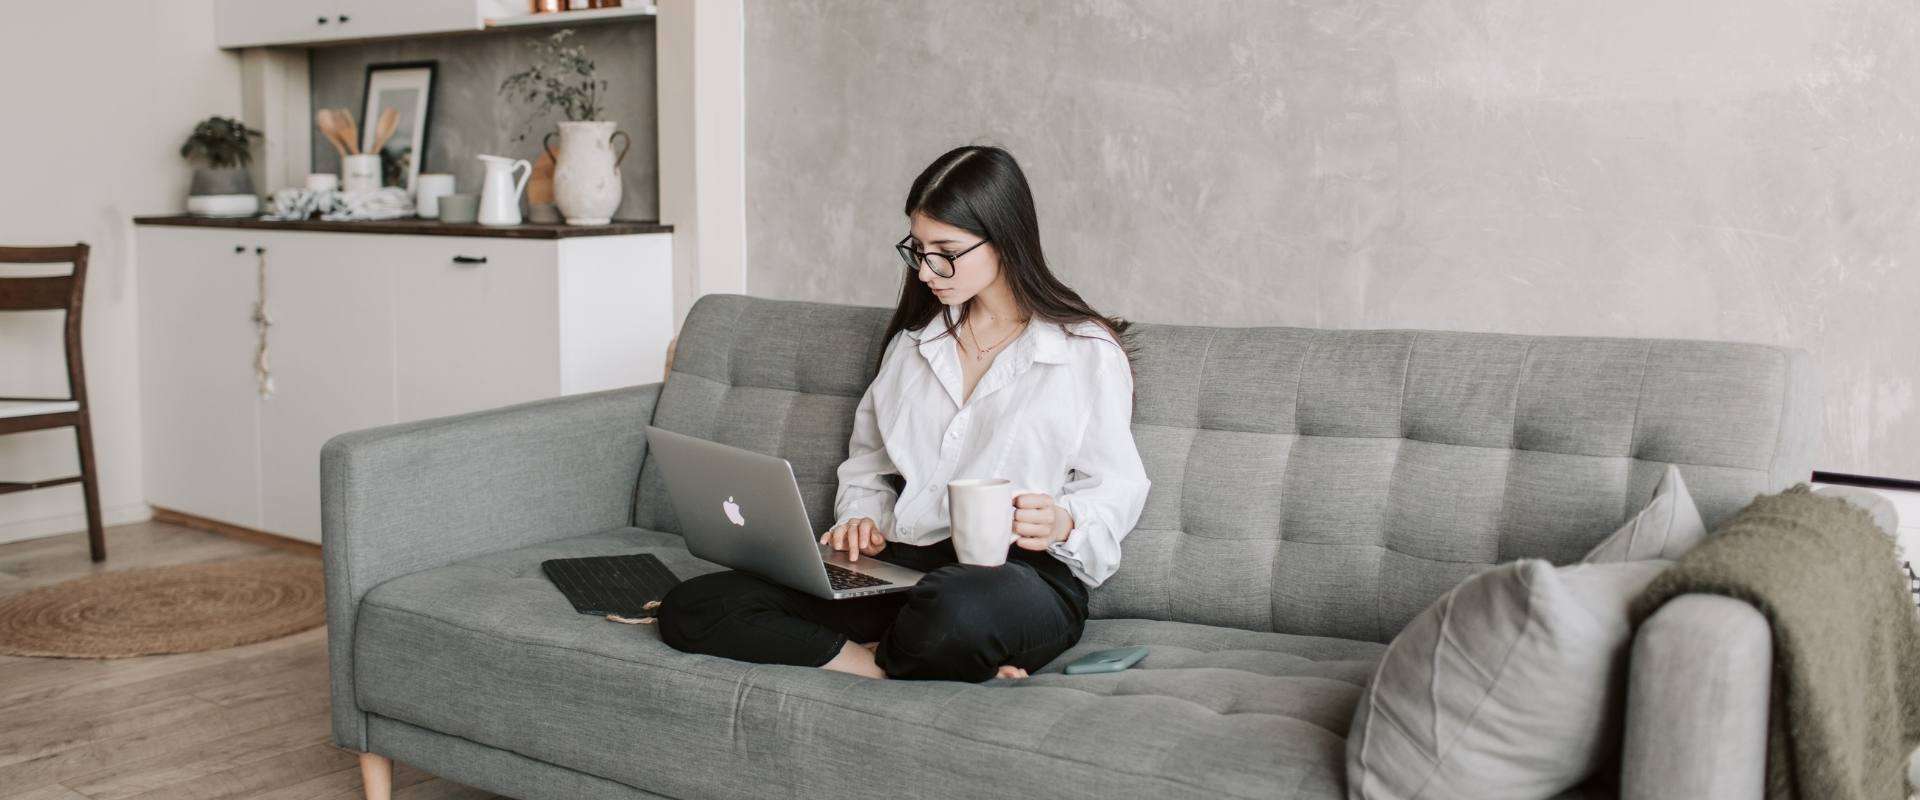 3 Ways to Support Employees Working From Home